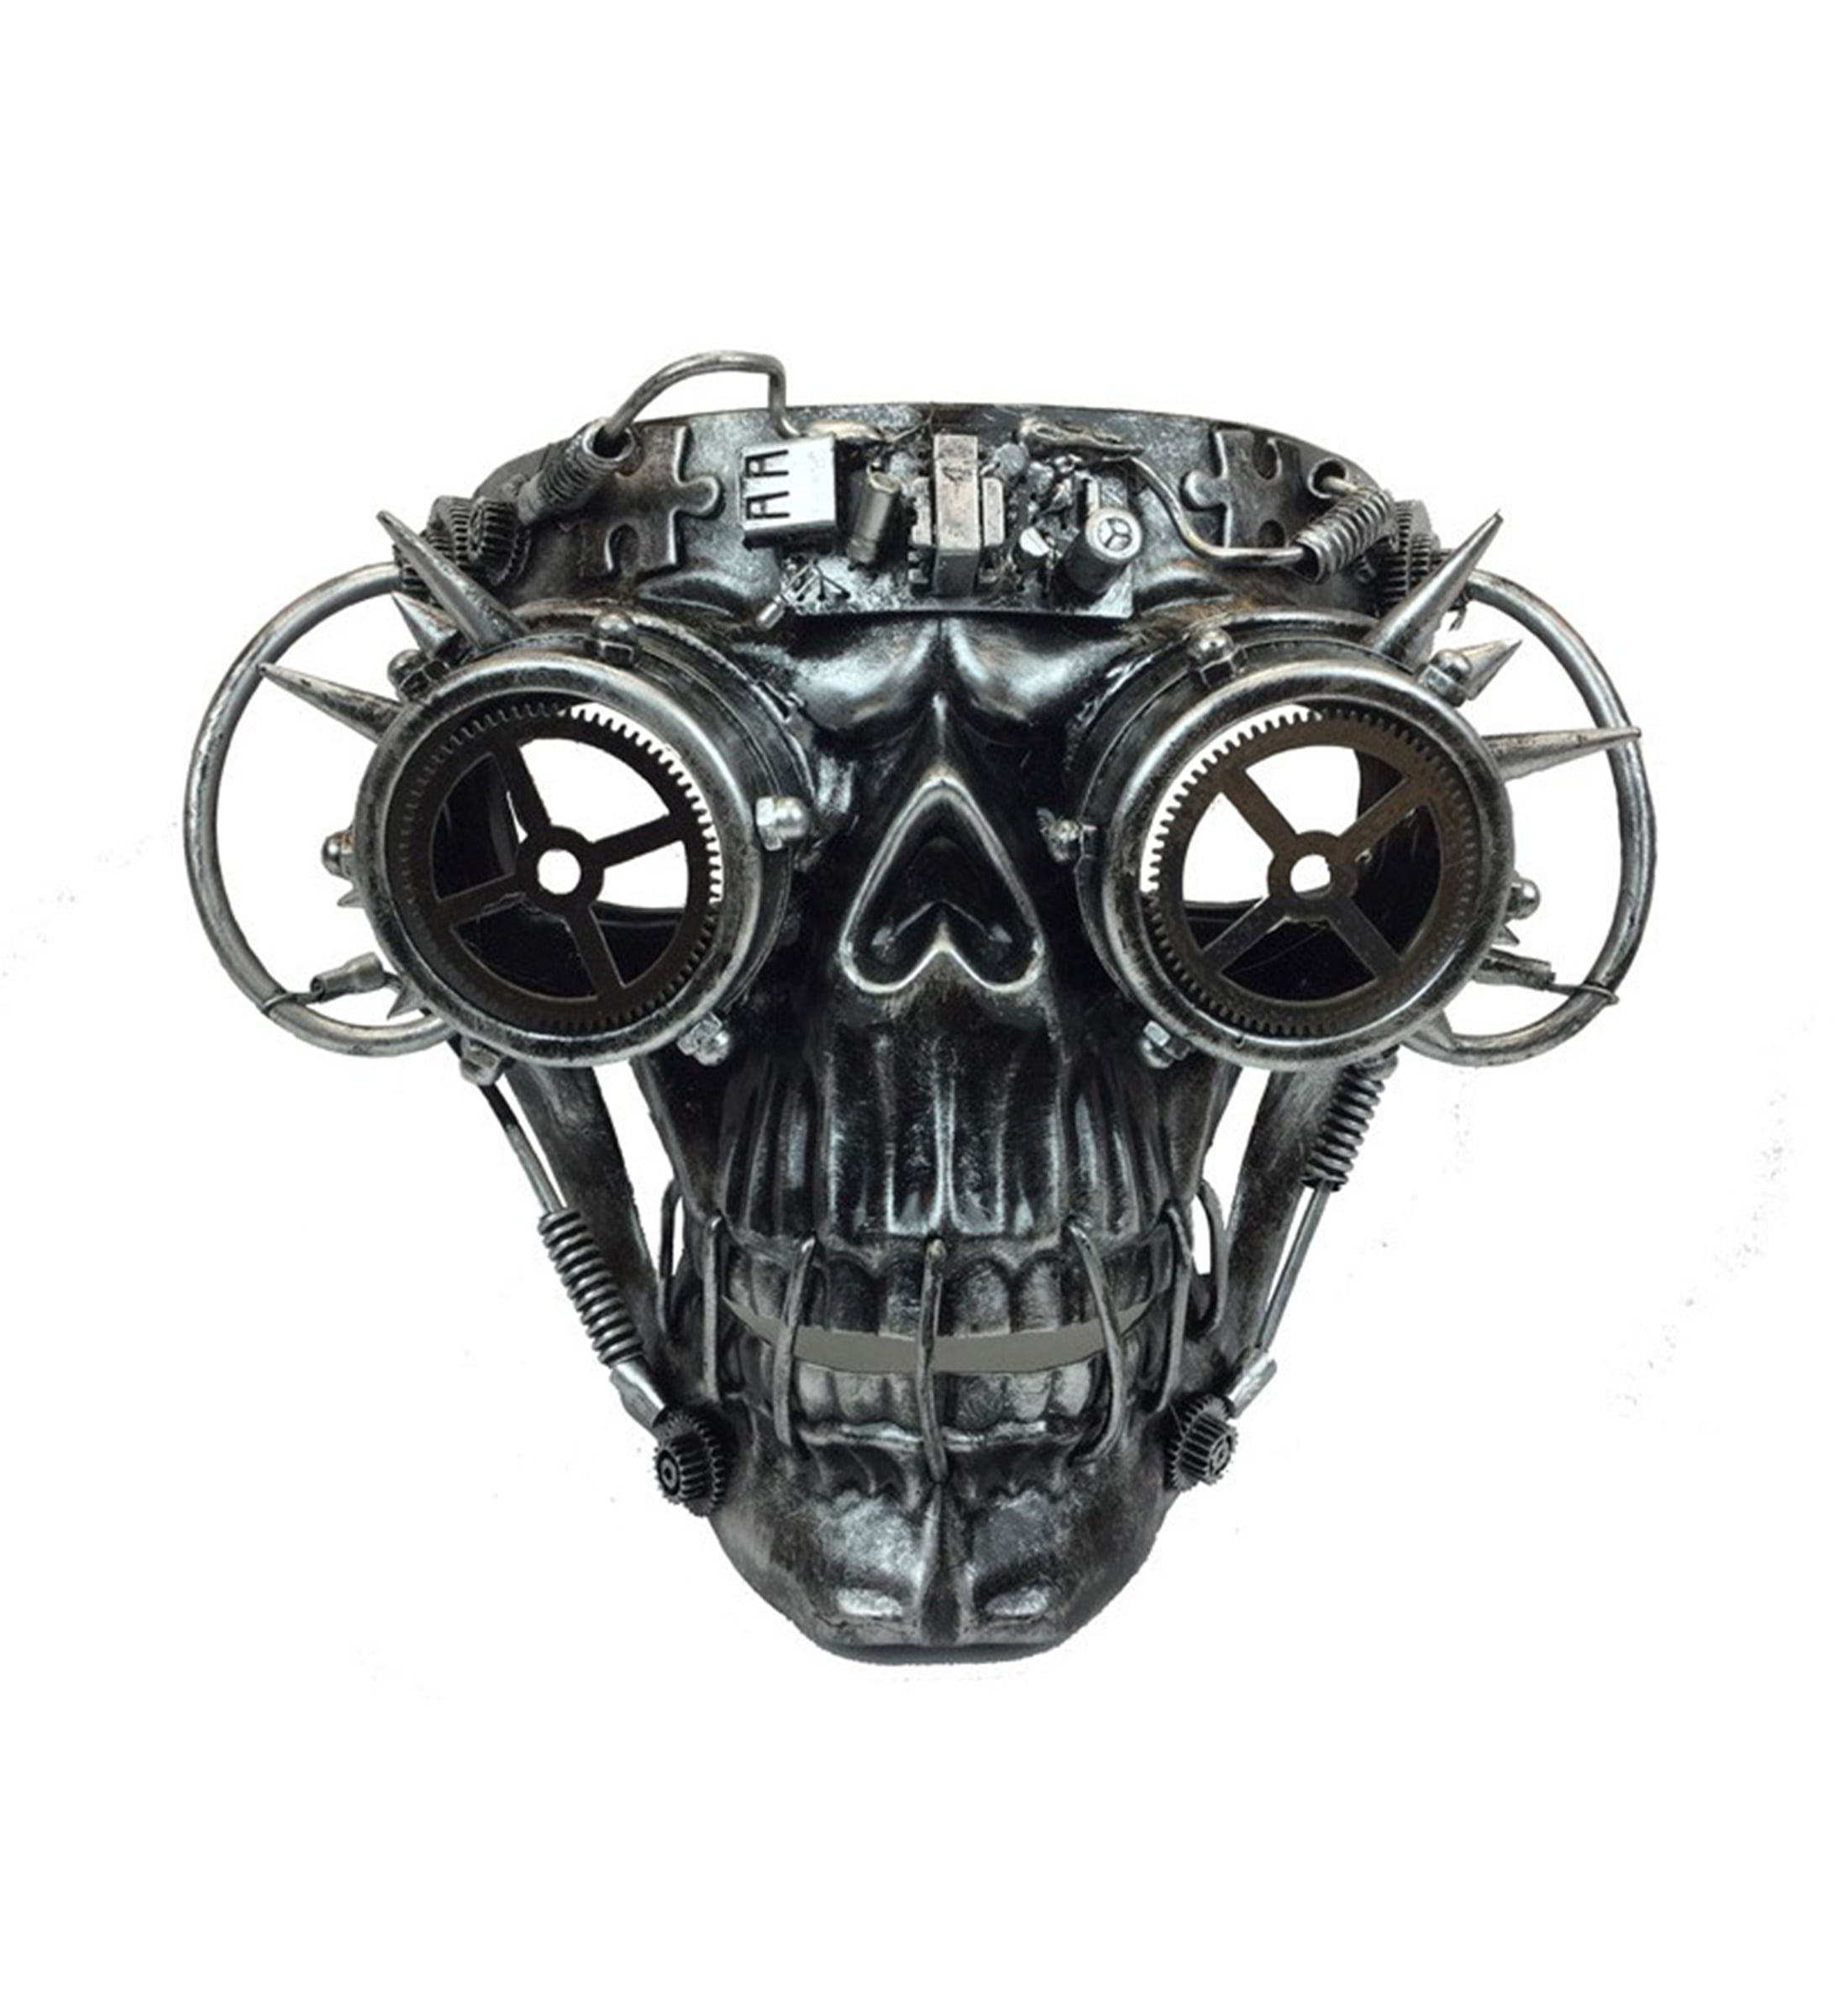 Attitude Studio Pink Skeleton Mask - Costume Skull Mask for Men and Women,  Steampunk Inspired Full Face Mask Costume Accessory, Perfect for Halloween